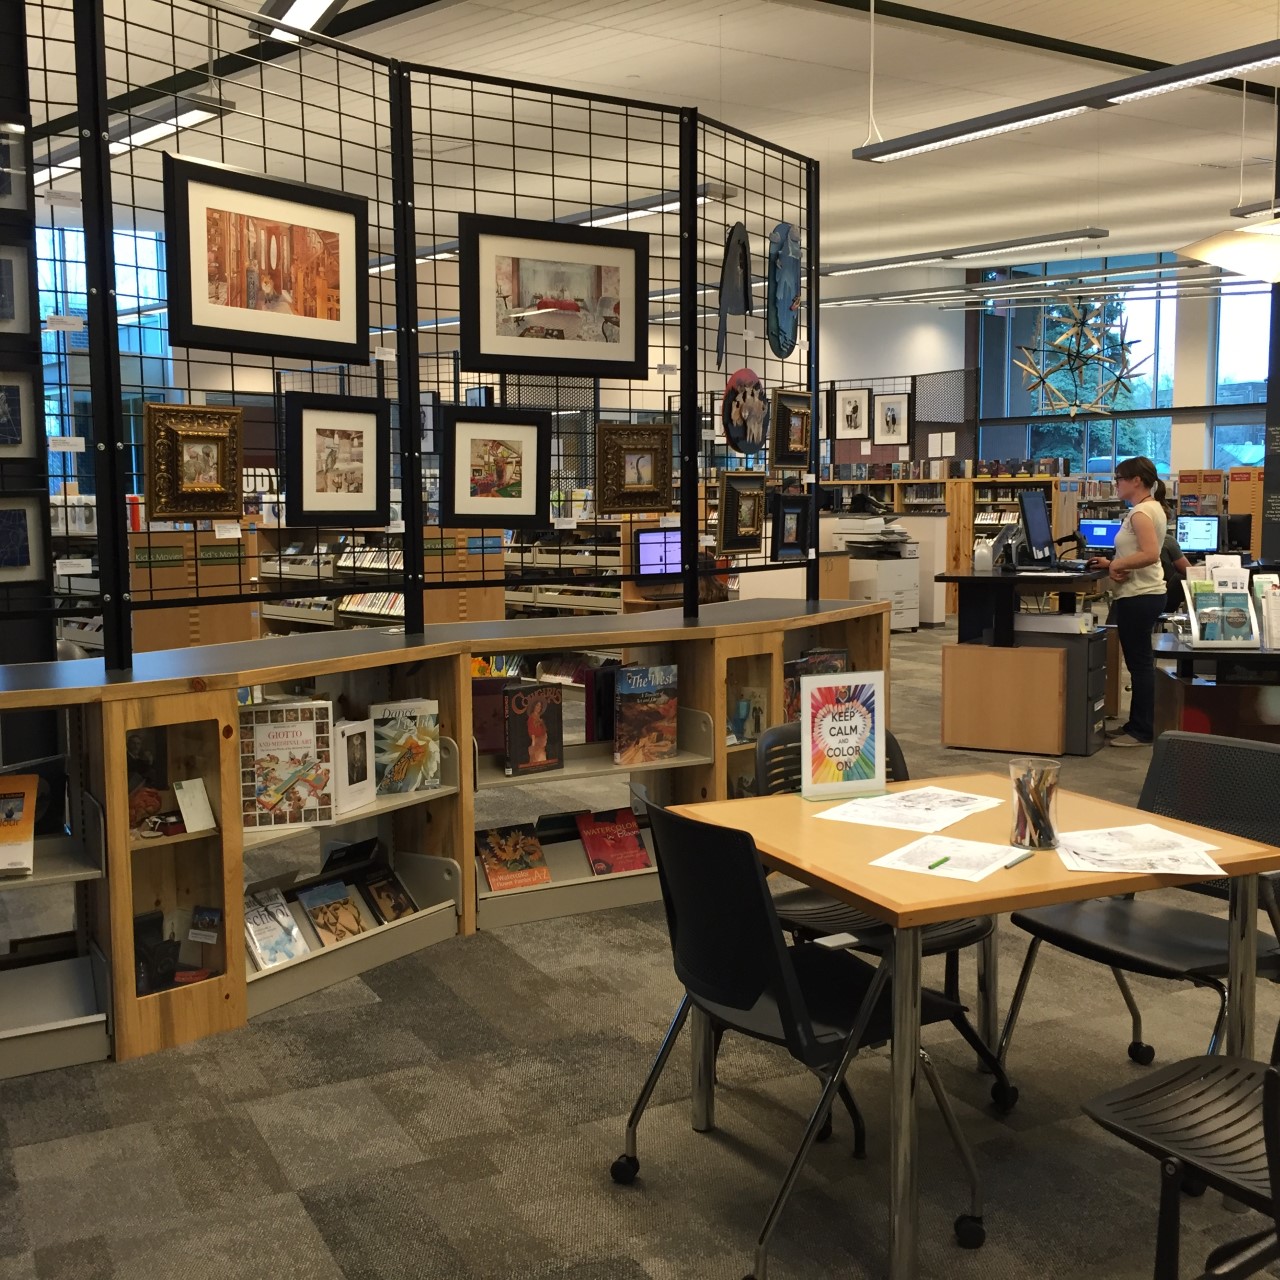 Image of Carbondale Library with art and book displays, a craft table, and a reference area. Photo by Sharon Morris.